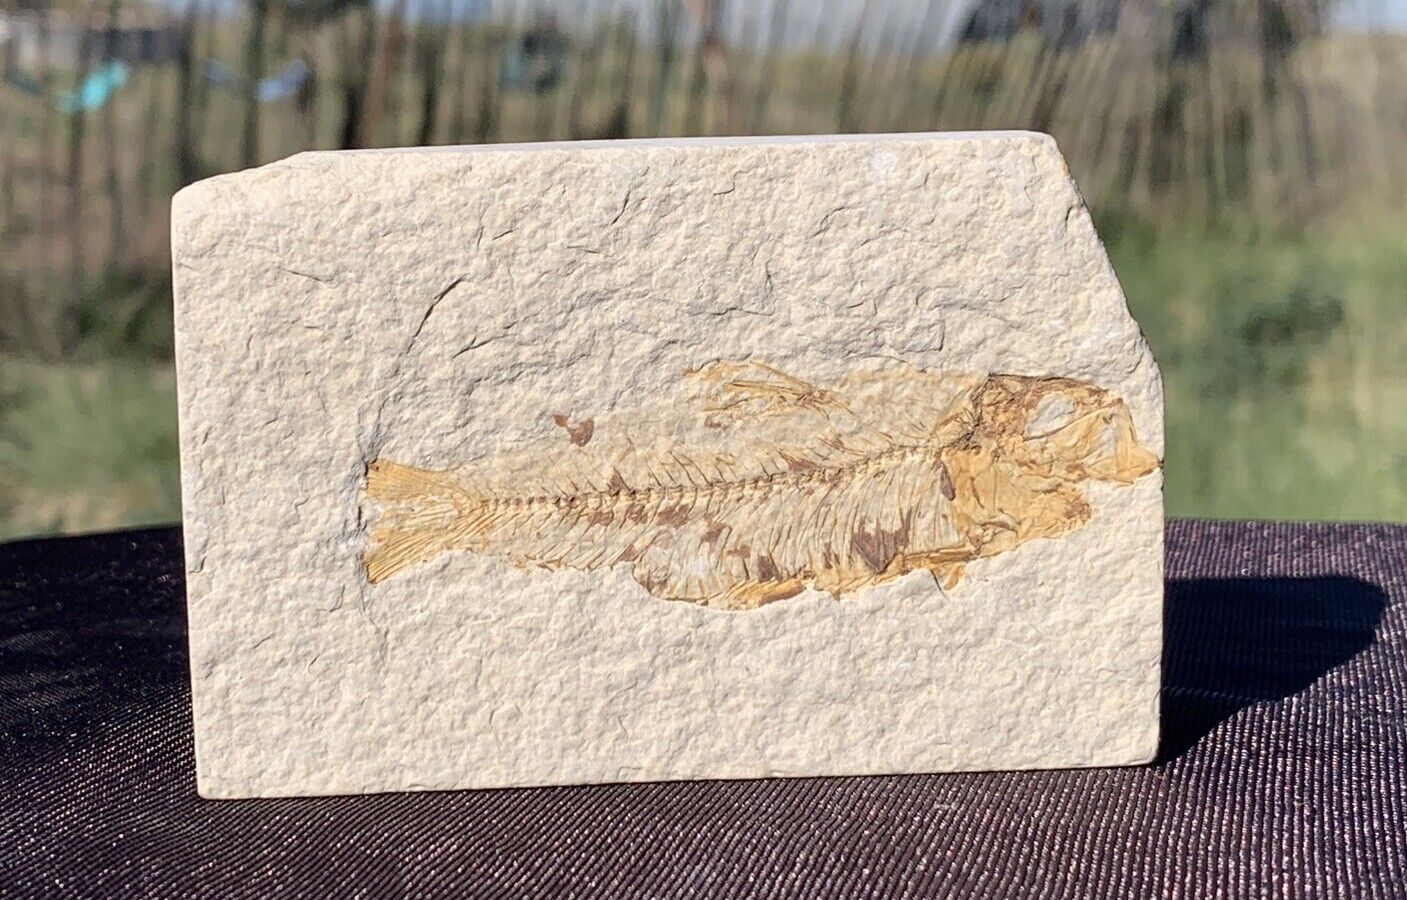 ☘️RR⛏: Wyoming Fish Fossil, Slabbed, Green River Formation, 3.75”